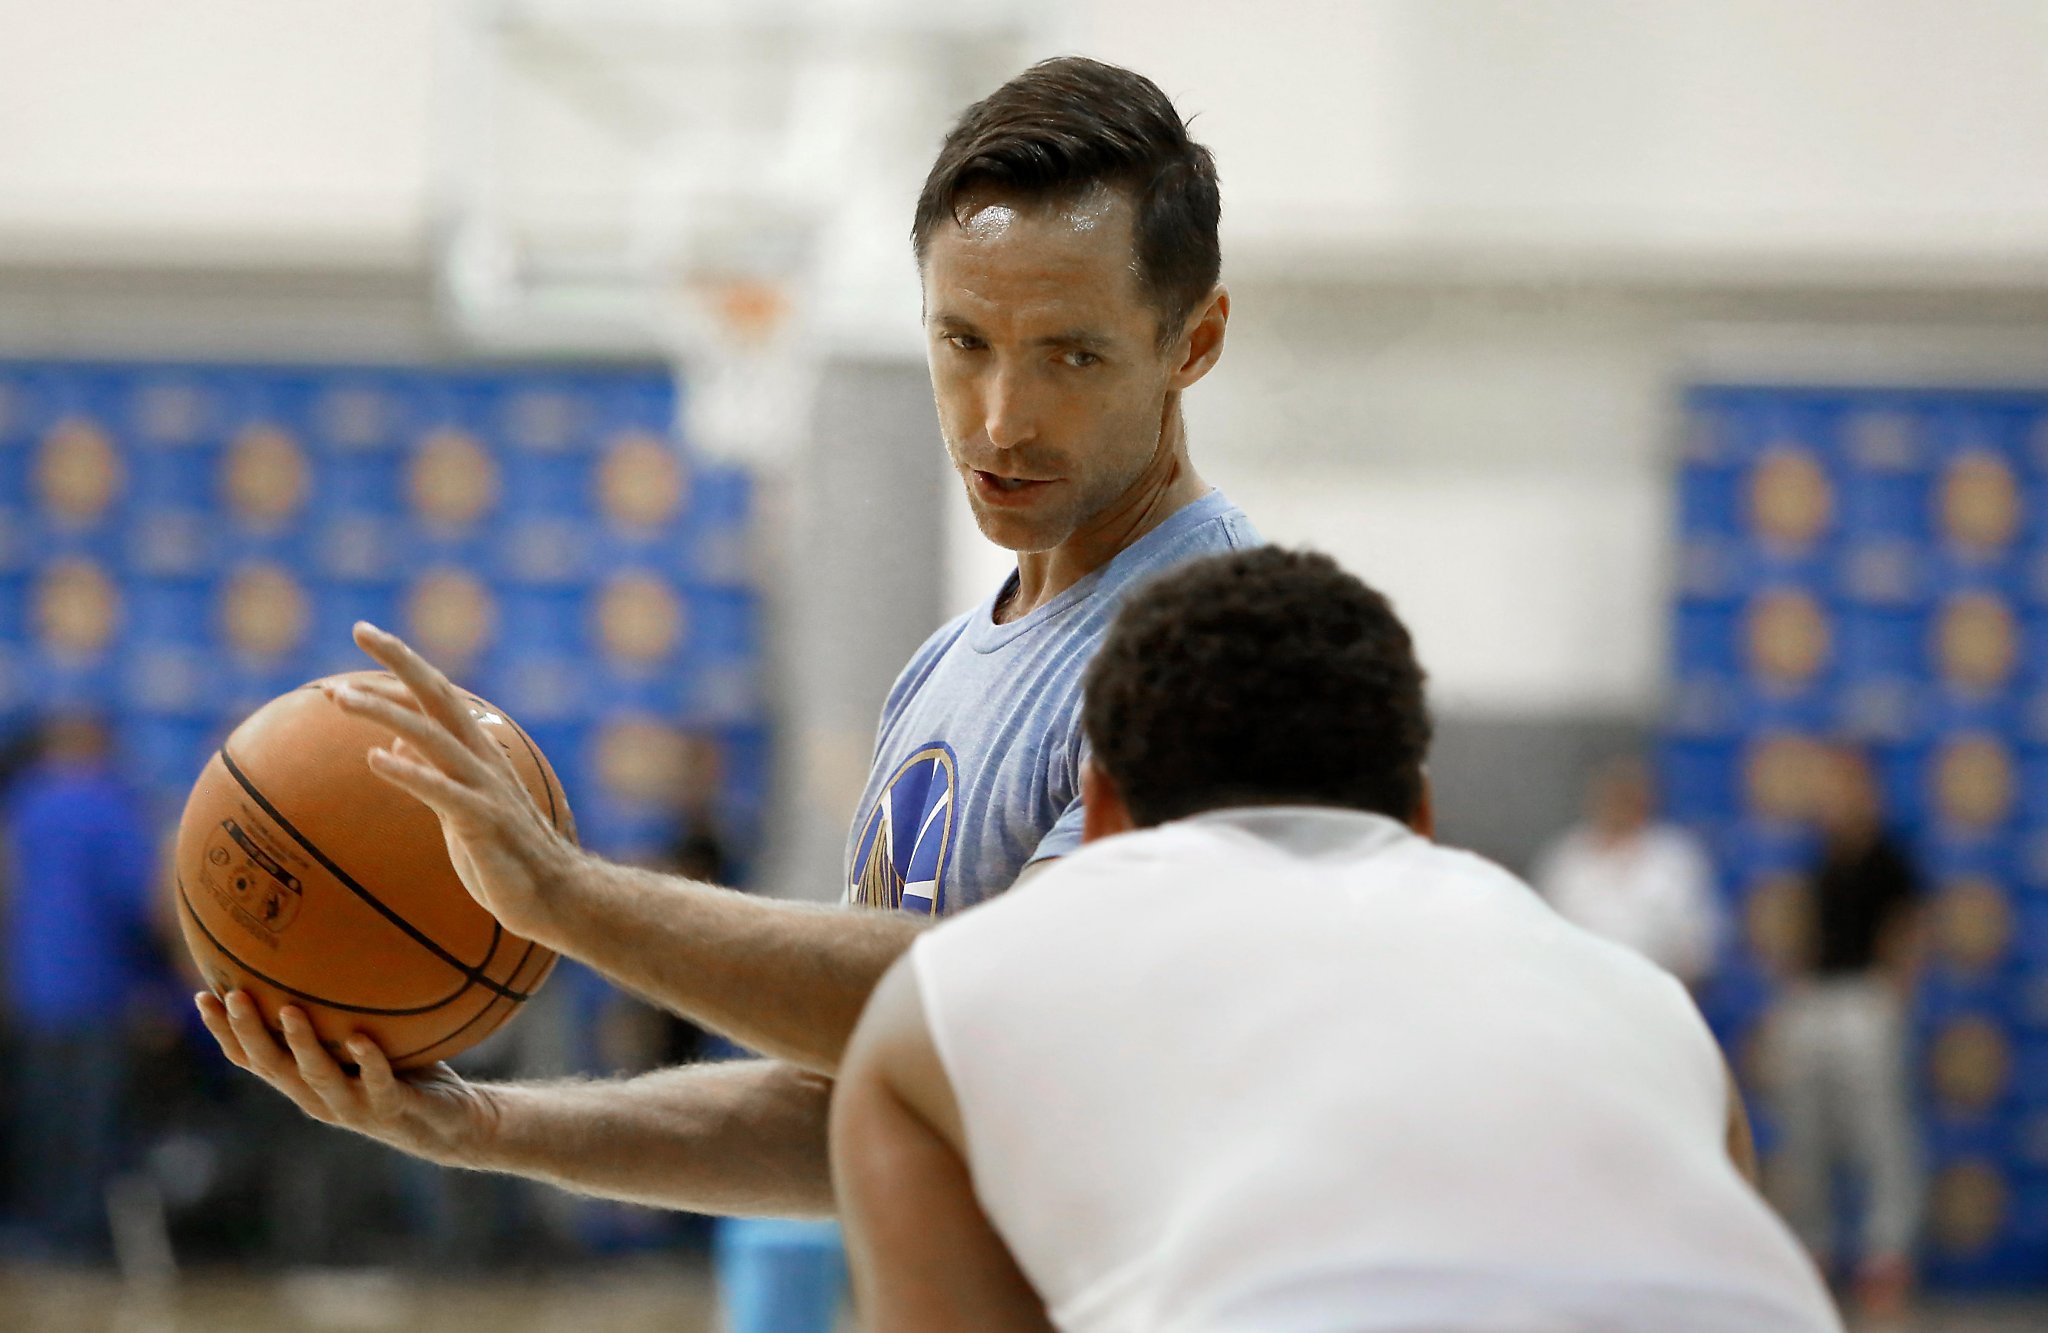 Warriors consultant Steve Nash to be inducted into Basketball Hall of Fame